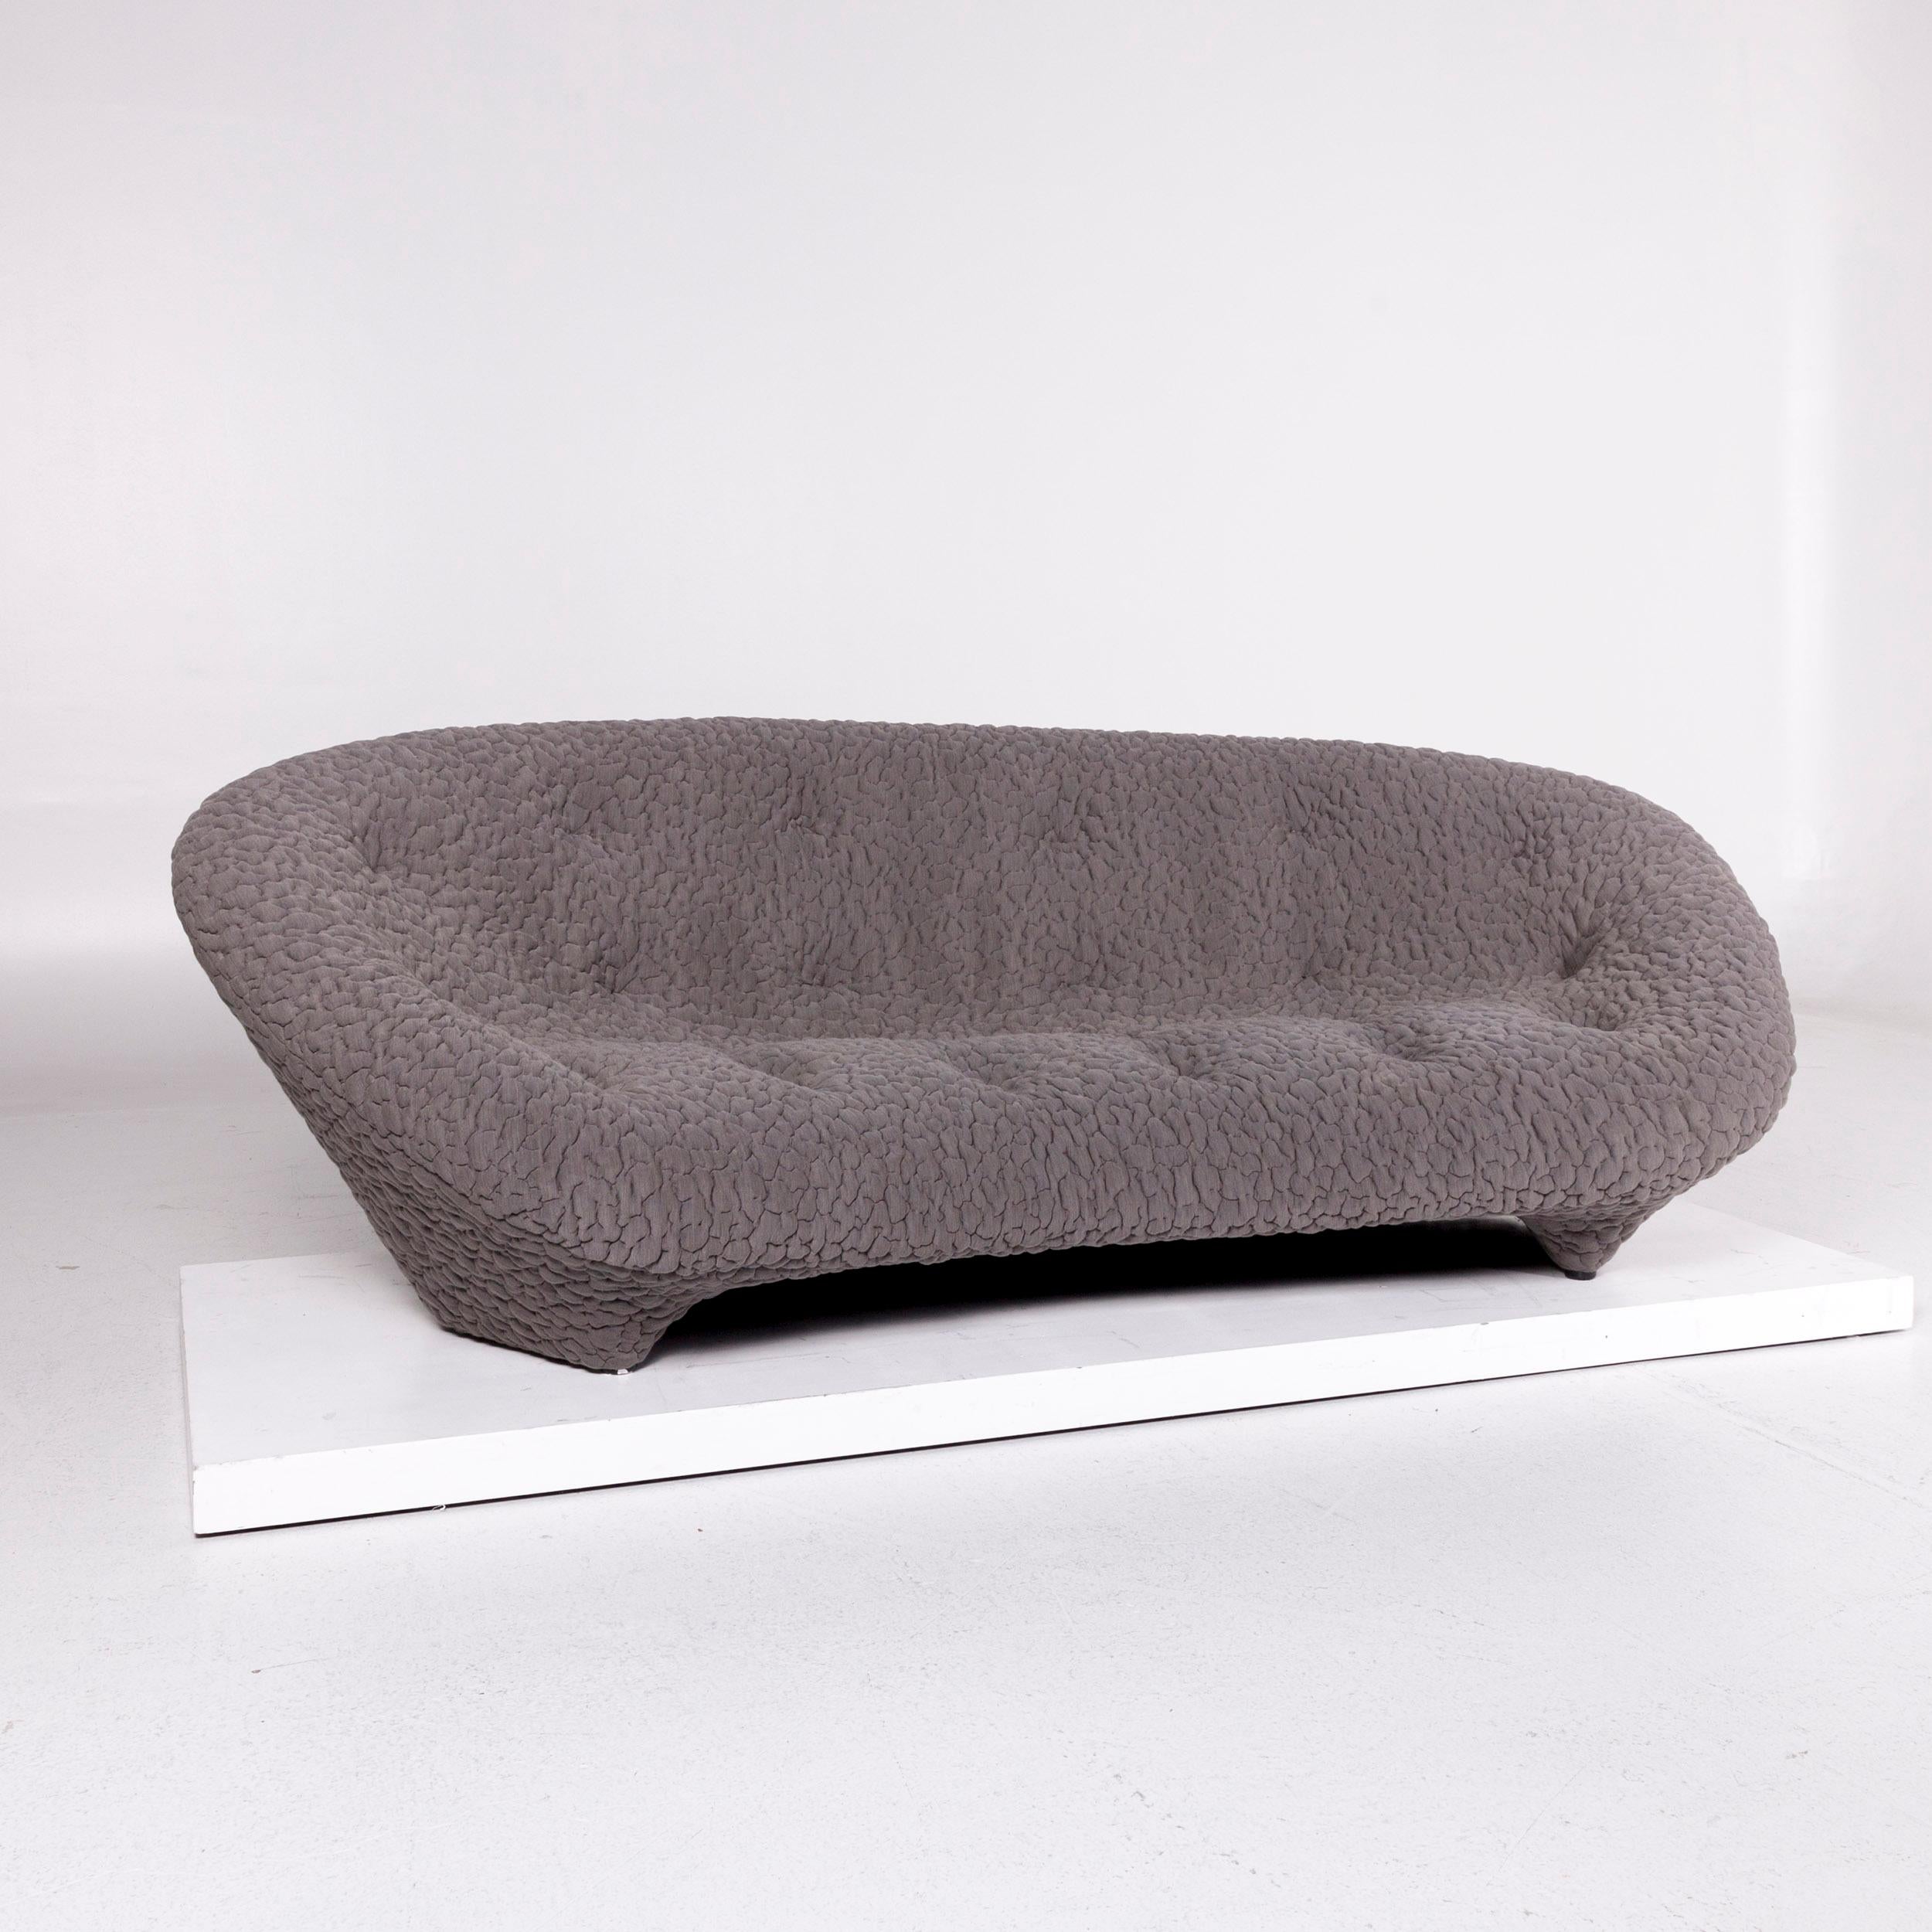 We bring to you a Ligne Roset Ploum fabric sofa gray three-seat Erwan & Ronan Bouroullec couch.
 
 Product measurements in centimeters:
 
Depth 123
Width 249
Height 79
Seat-height 40
Rest-height 55
Seat-depth 73
Seat-width 180
Back-height